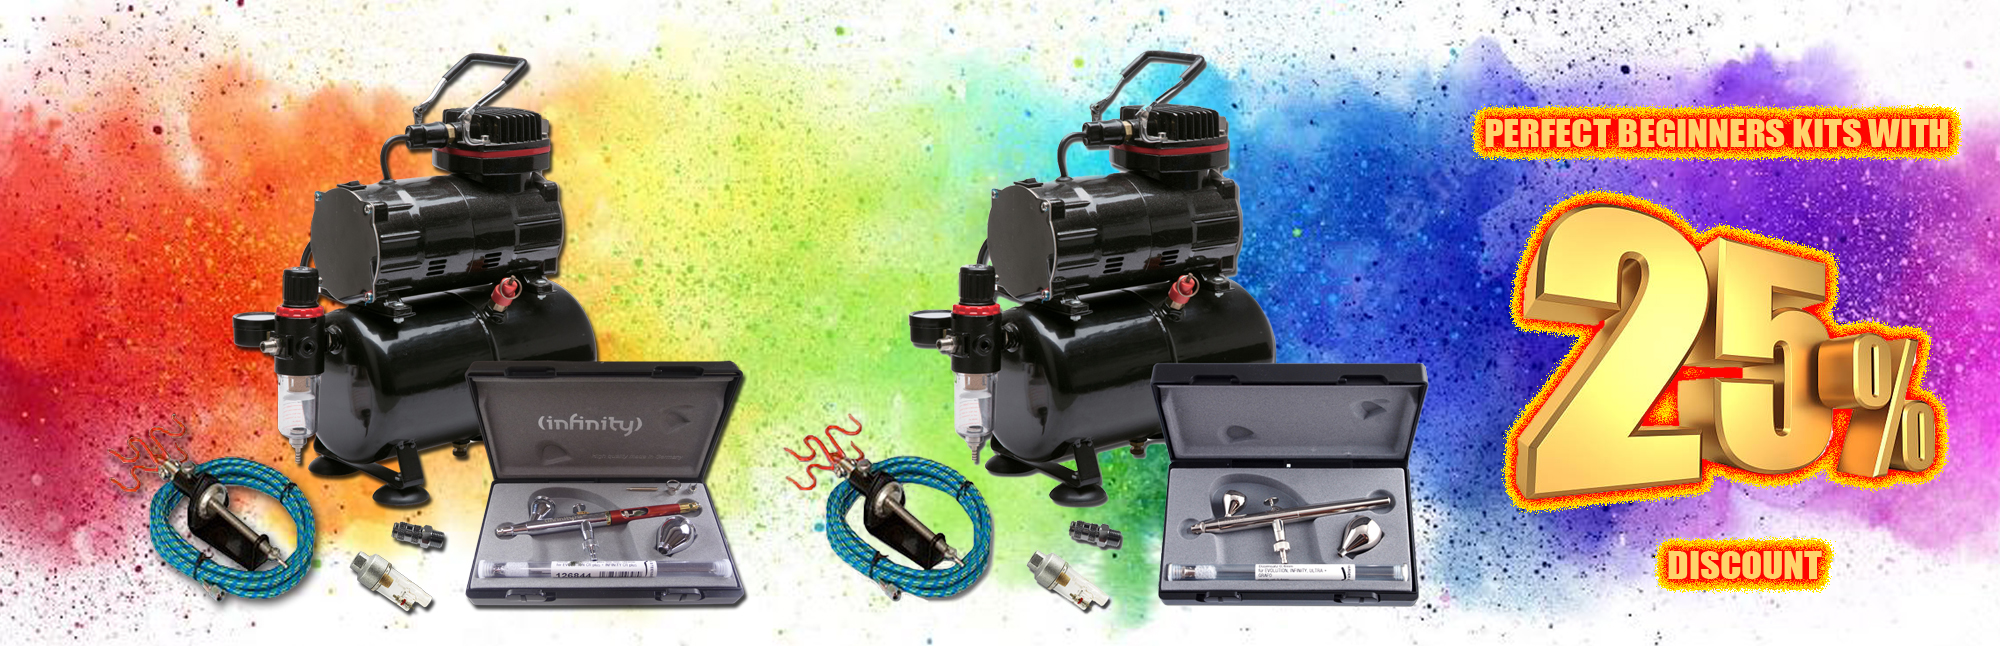 Up to 25% savings on our Value Airbrush Kits